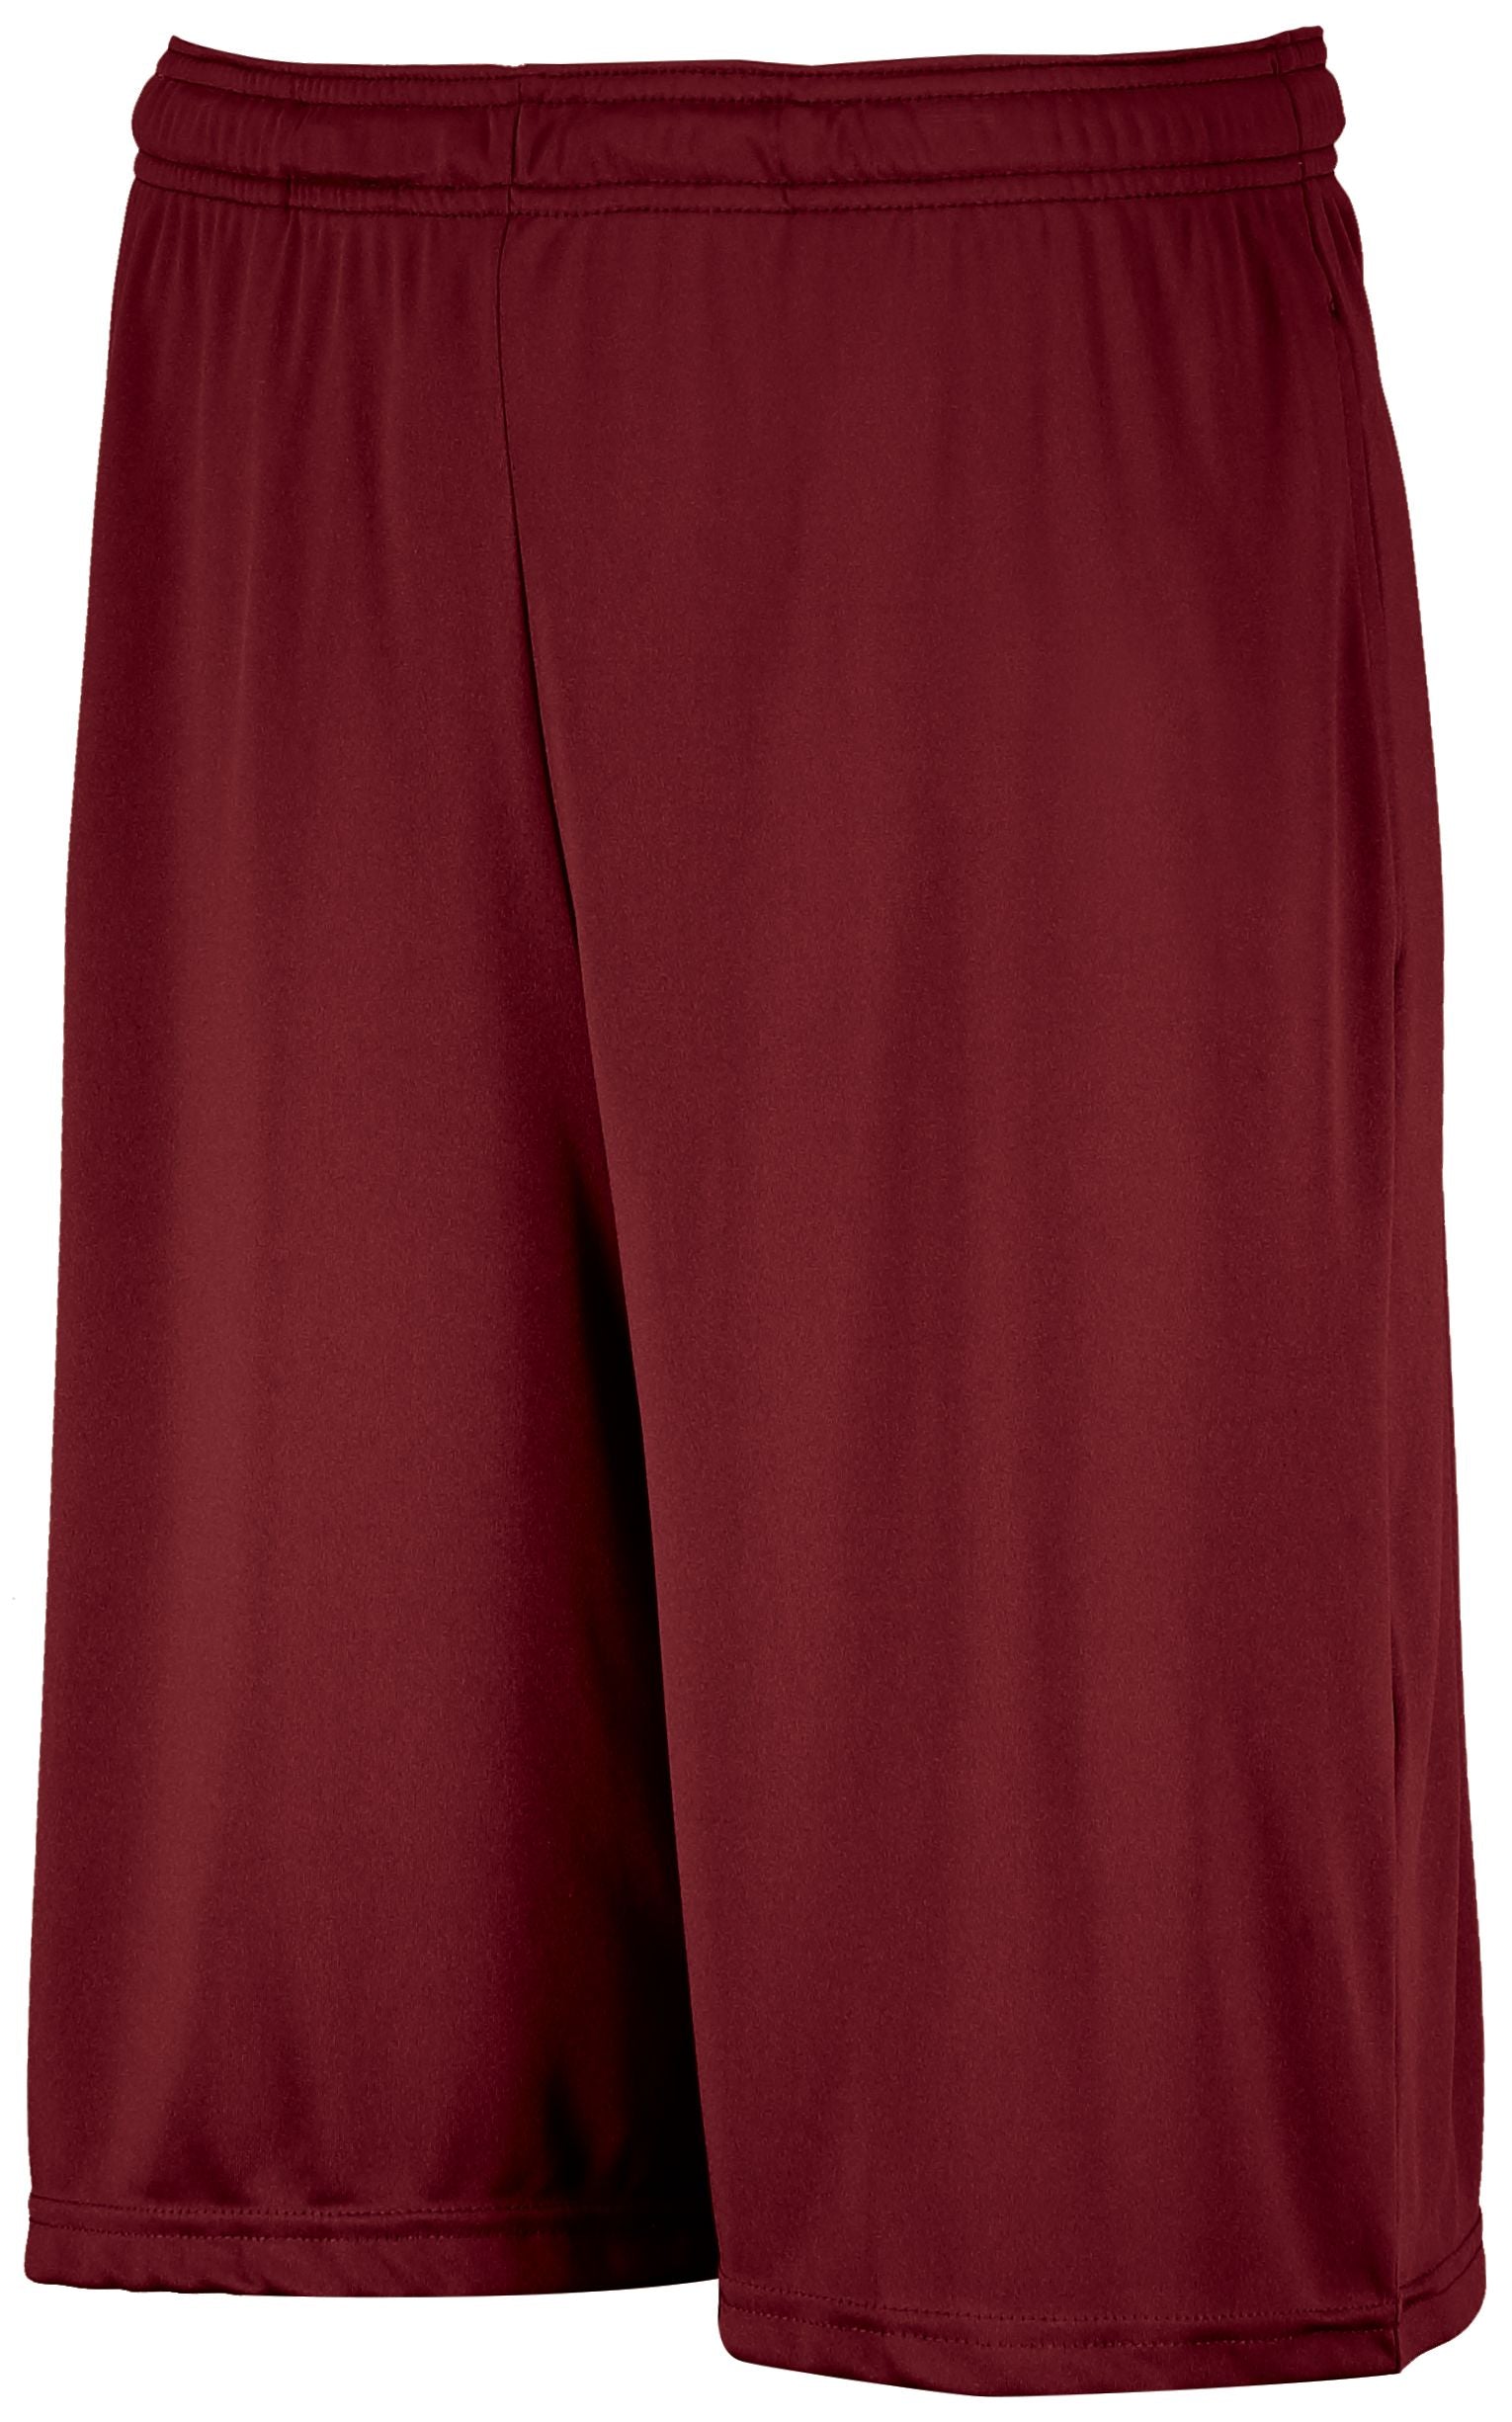 Russell Athletic Dri-Power Essential Performance Shorts With Pockets in Cardinal  -Part of the Adult, Adult-Shorts, Russell-Athletic-Products product lines at KanaleyCreations.com